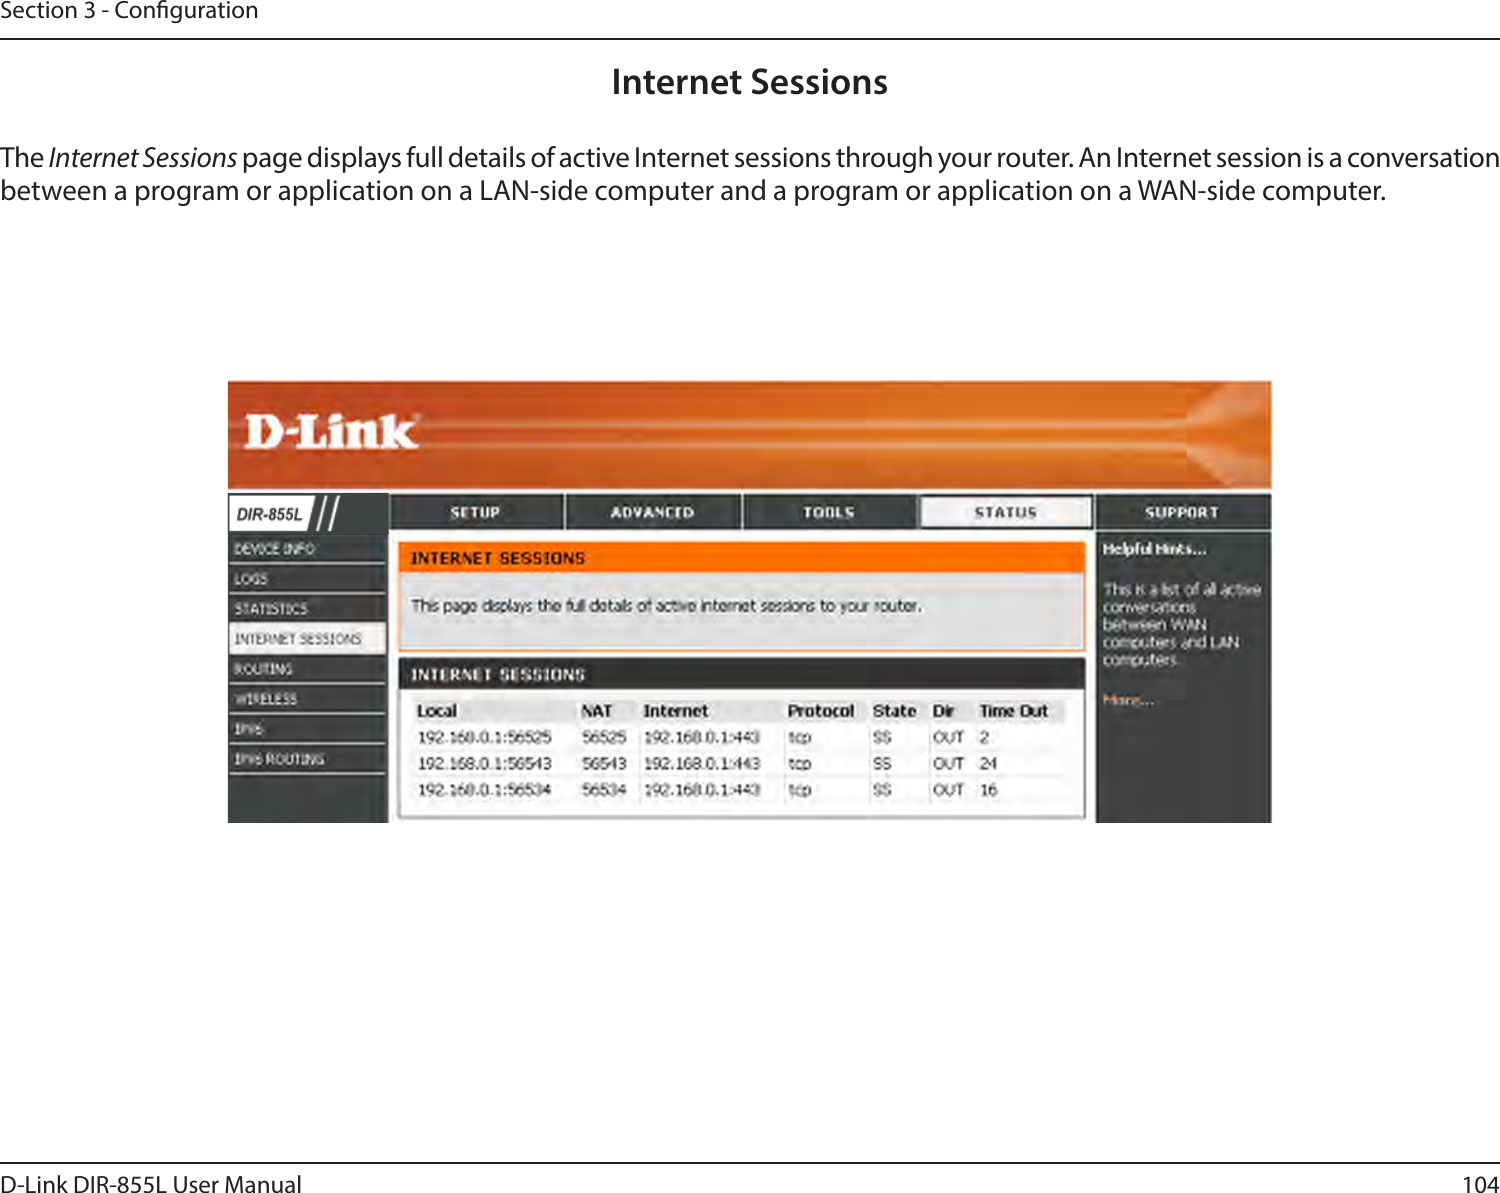 104D-Link DIR-855L User ManualSection 3 - CongurationInternet SessionsThe Internet Sessions page displays full details of active Internet sessions through your router. An Internet session is a conversation between a program or application on a LAN-side computer and a program or application on a WAN-side computer. 